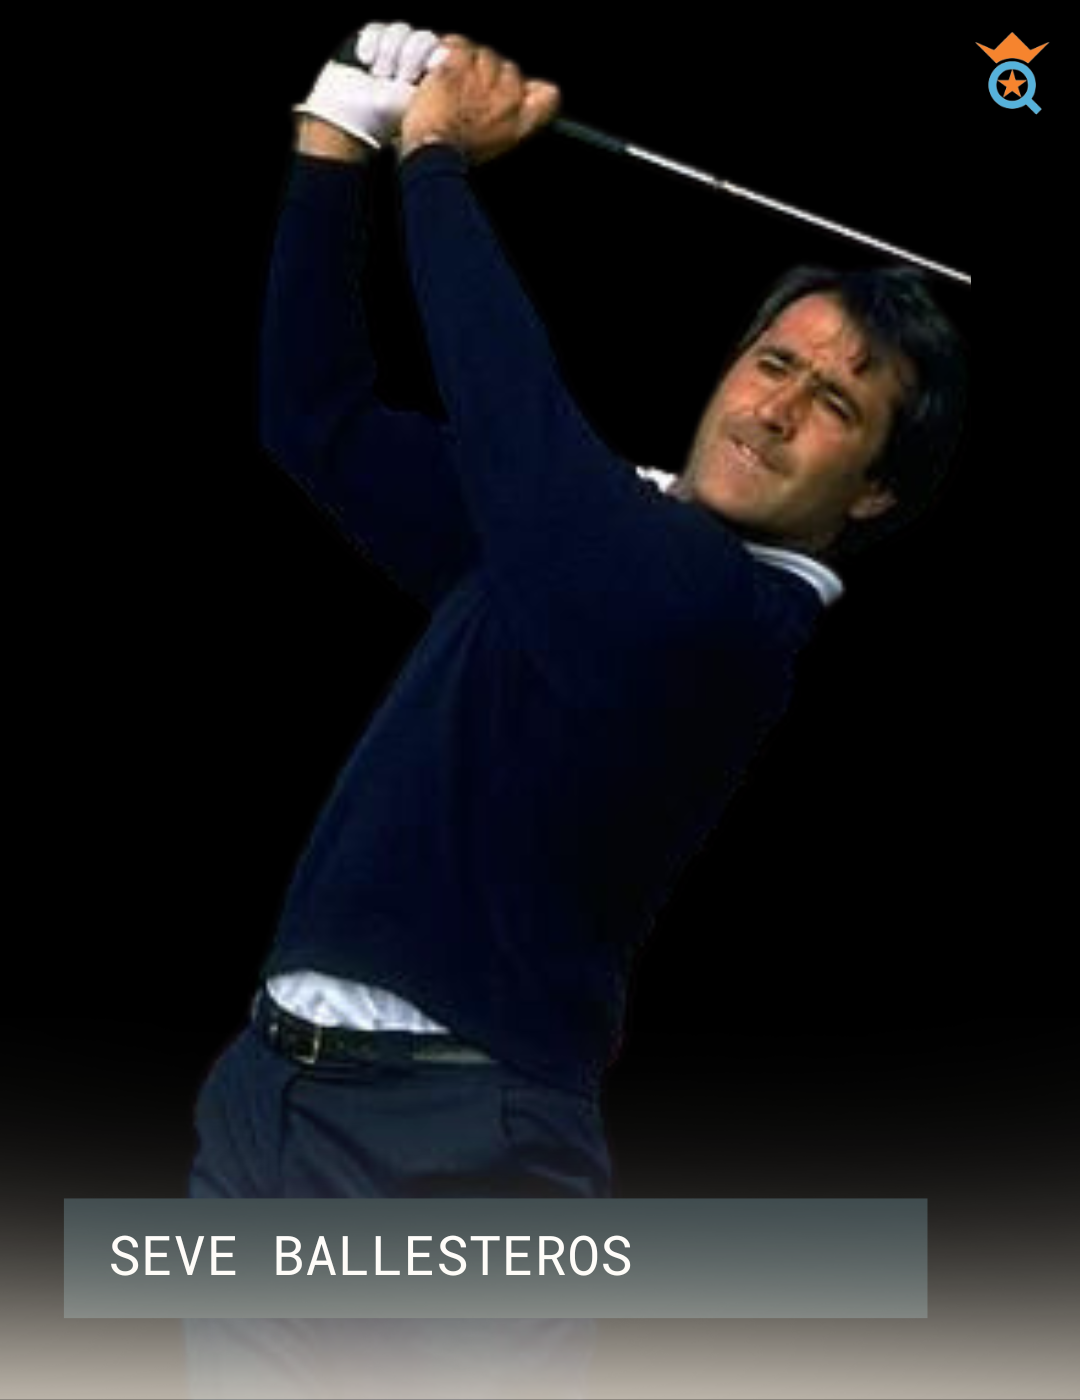 Best Golf Players of All Time, Seve Ballesteros